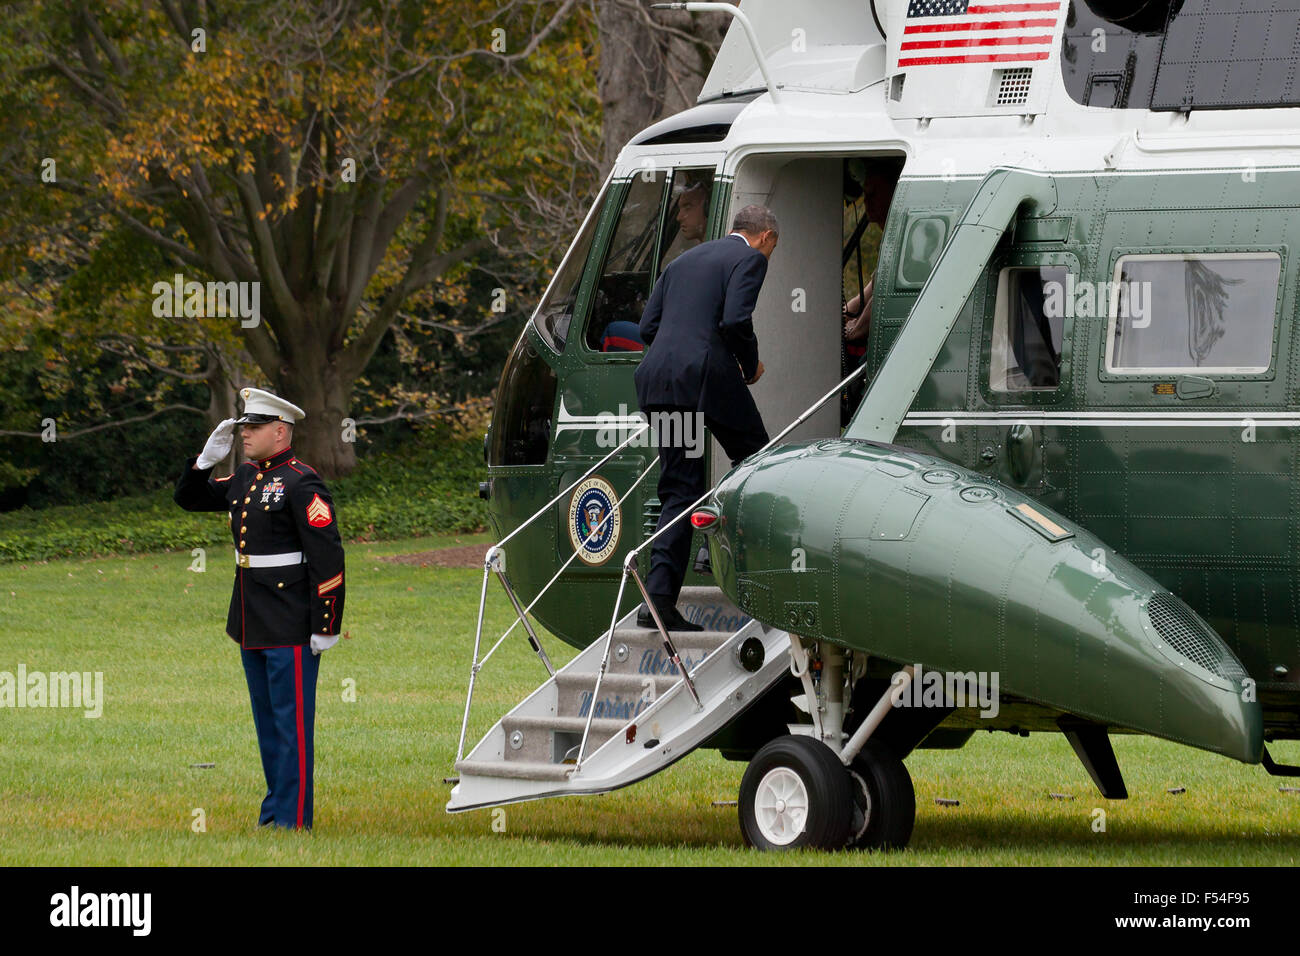 Marine One helicopter lands on White House lawn with President Obama Photo Print 